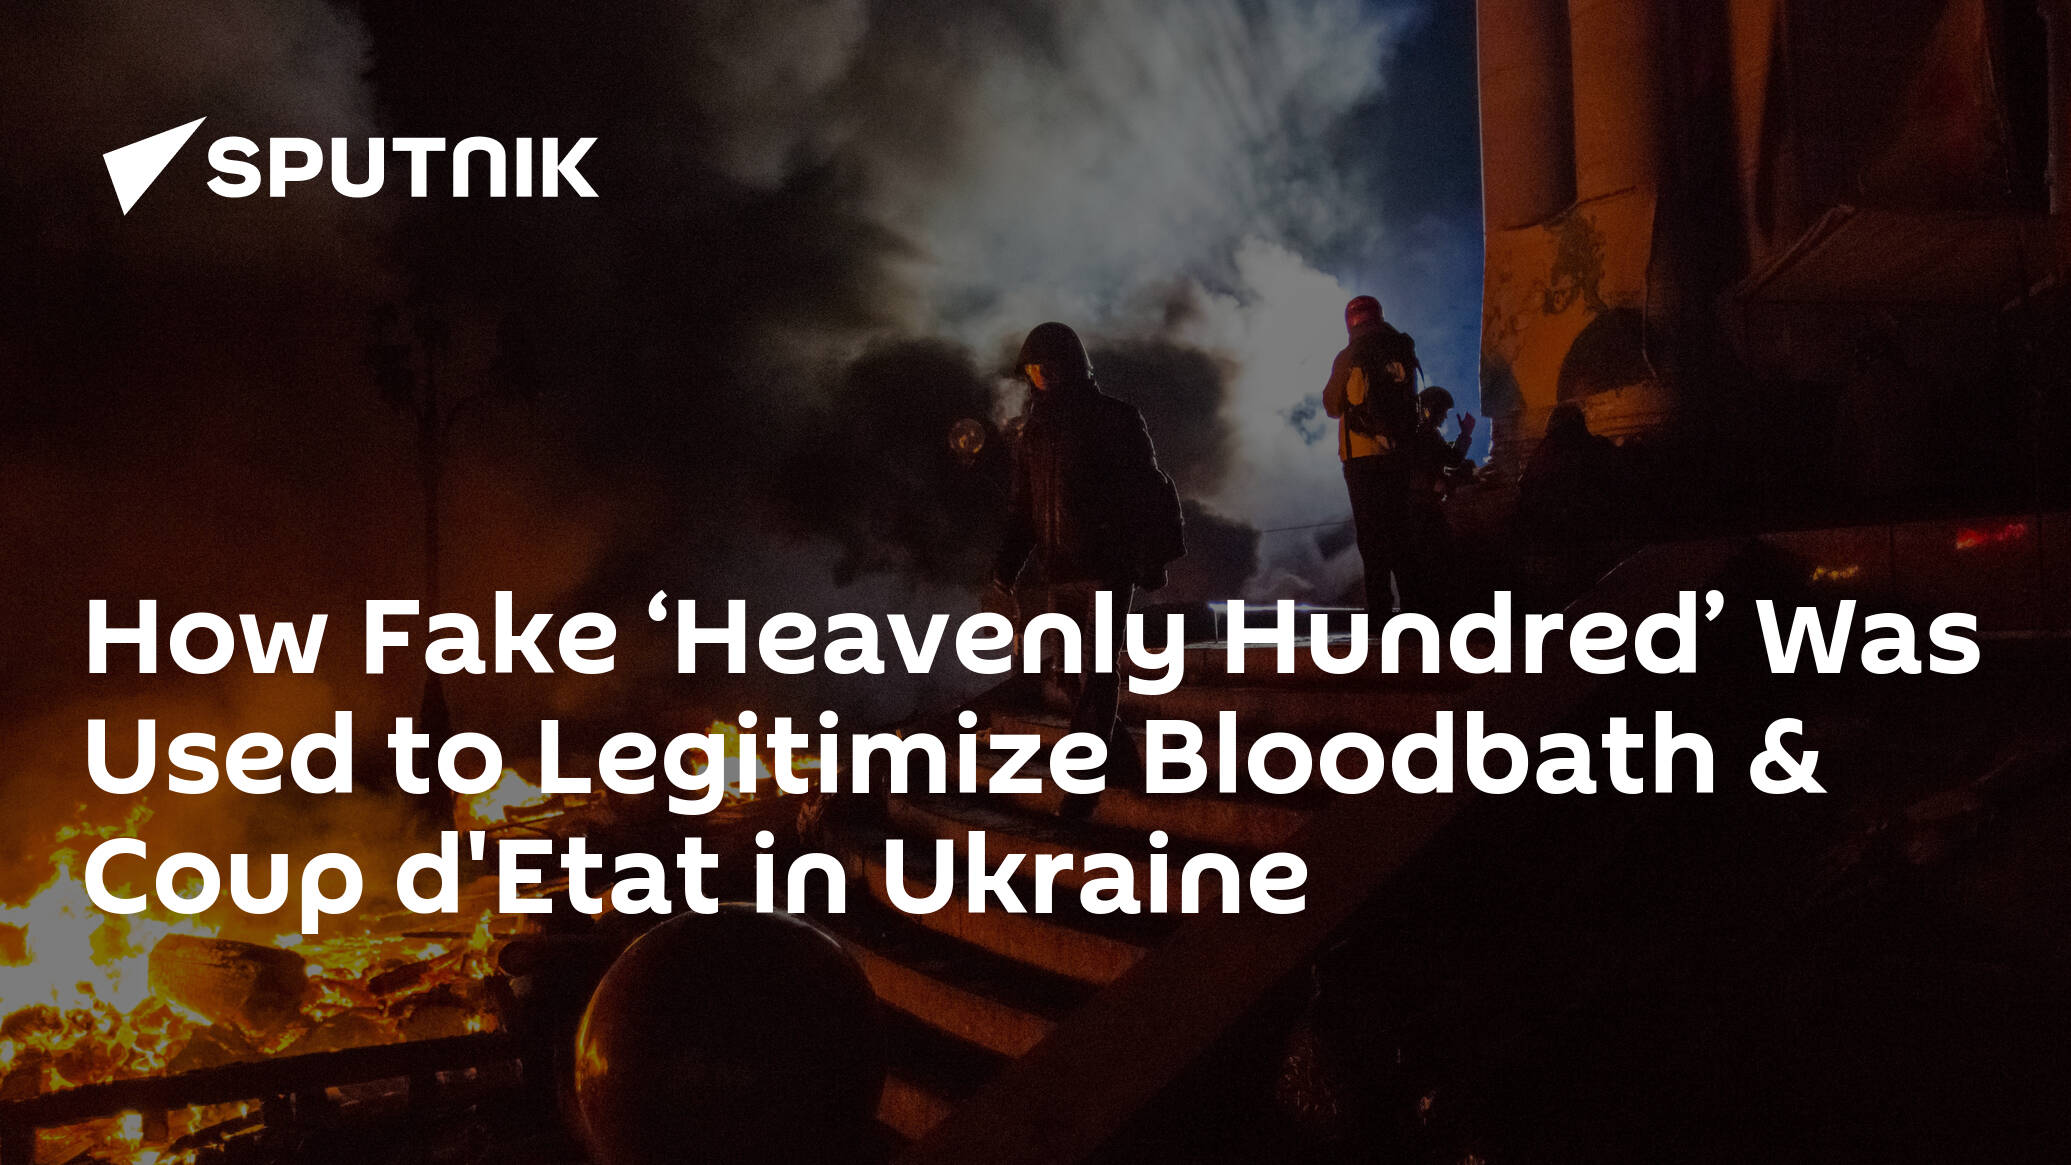 How Fake ‘Heavenly Hundred’ Was Used to Legitimize Bloodbath & Coup d'Etat in Ukraine